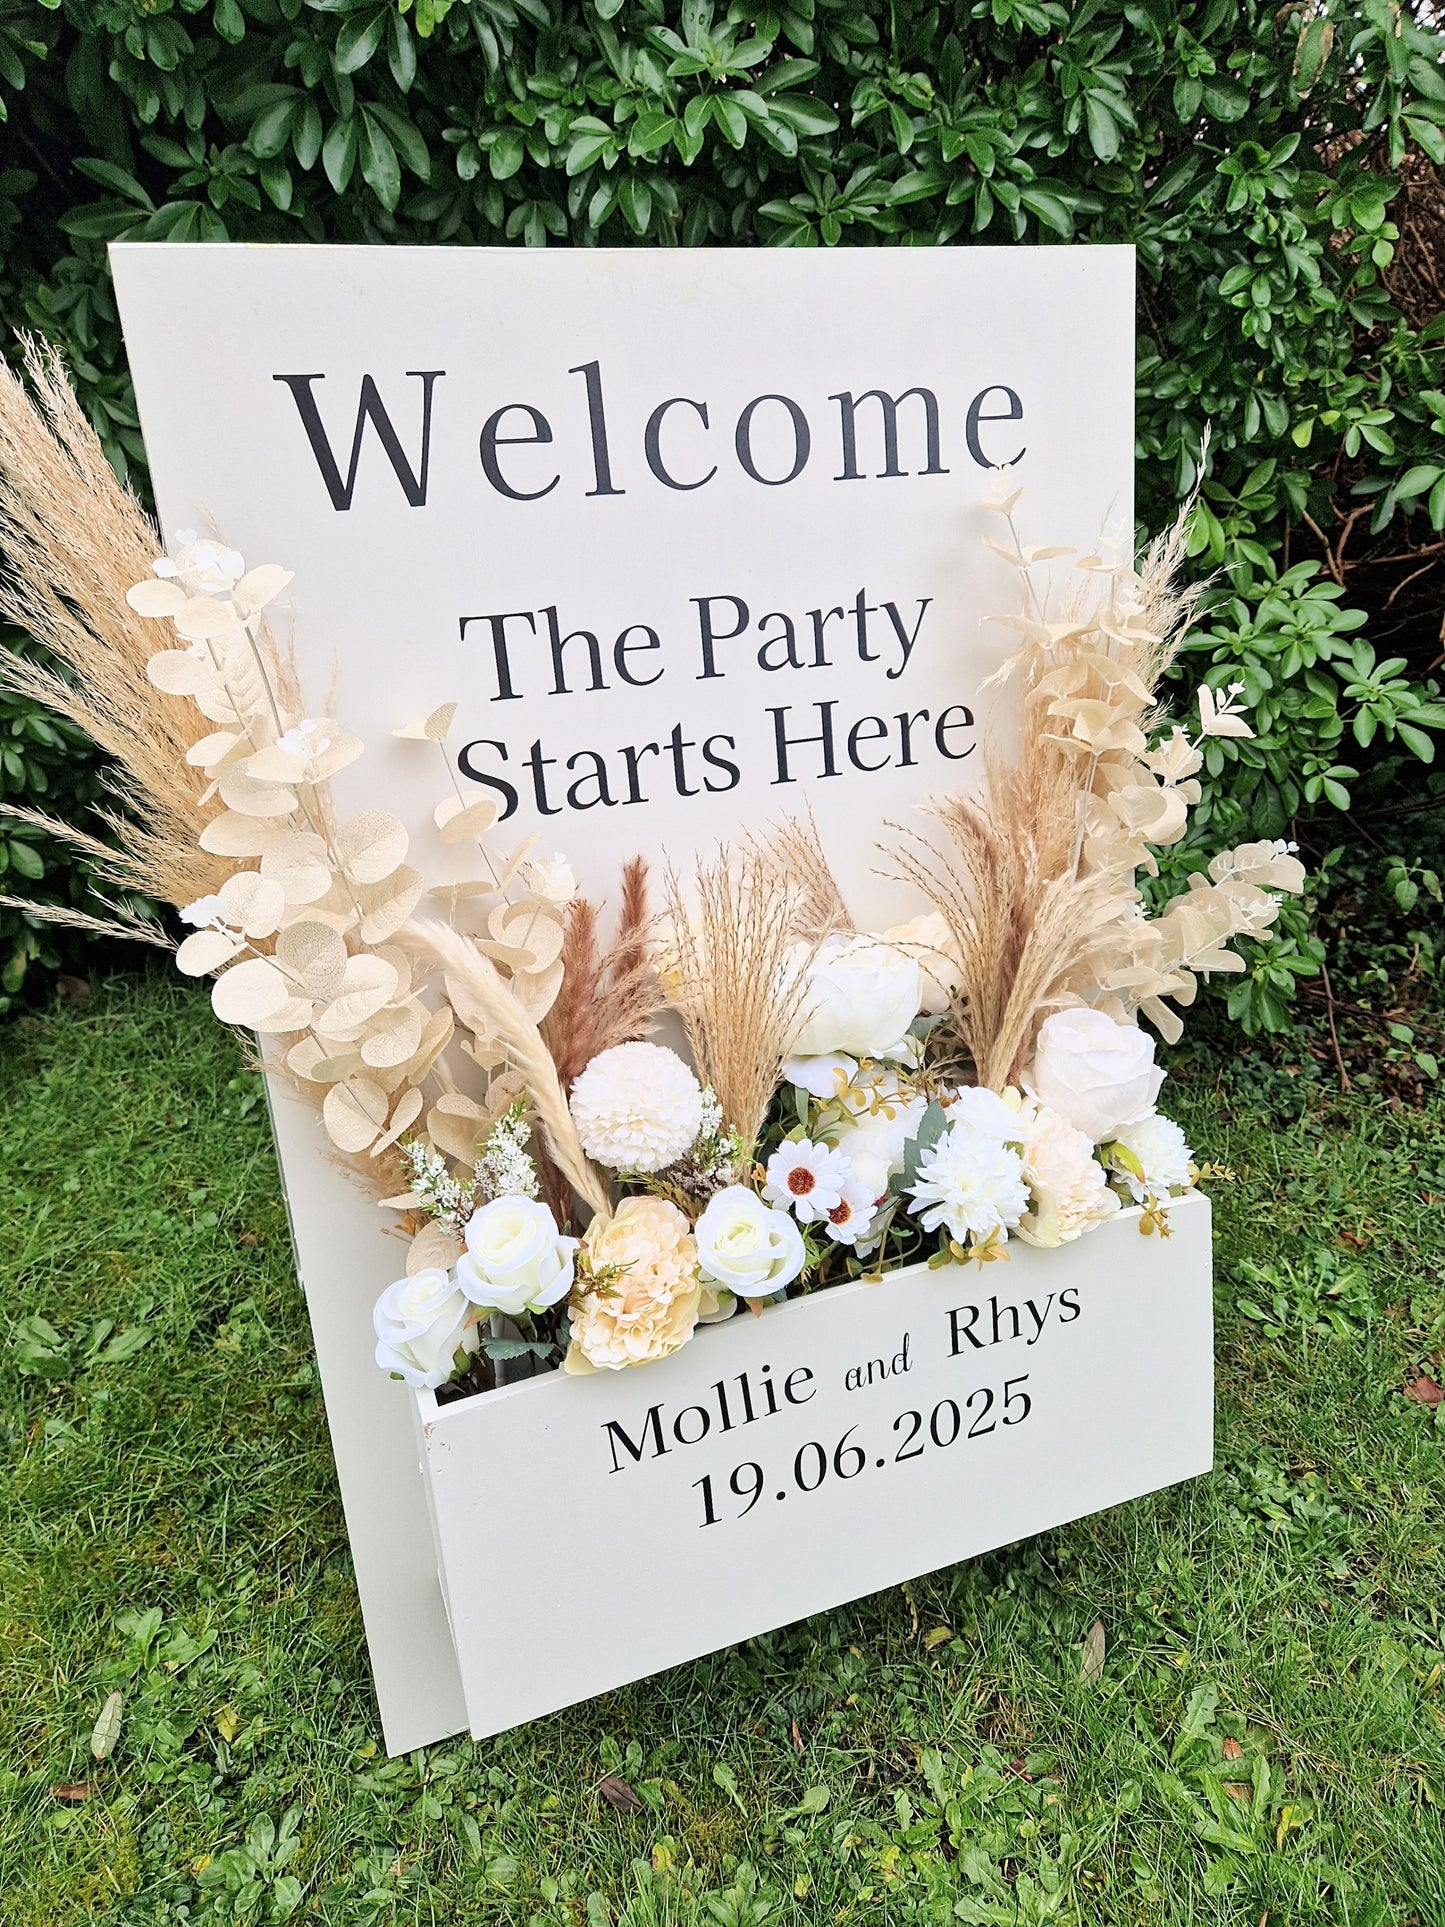 Welcome Flower Box Freestanding Easel Sign - White